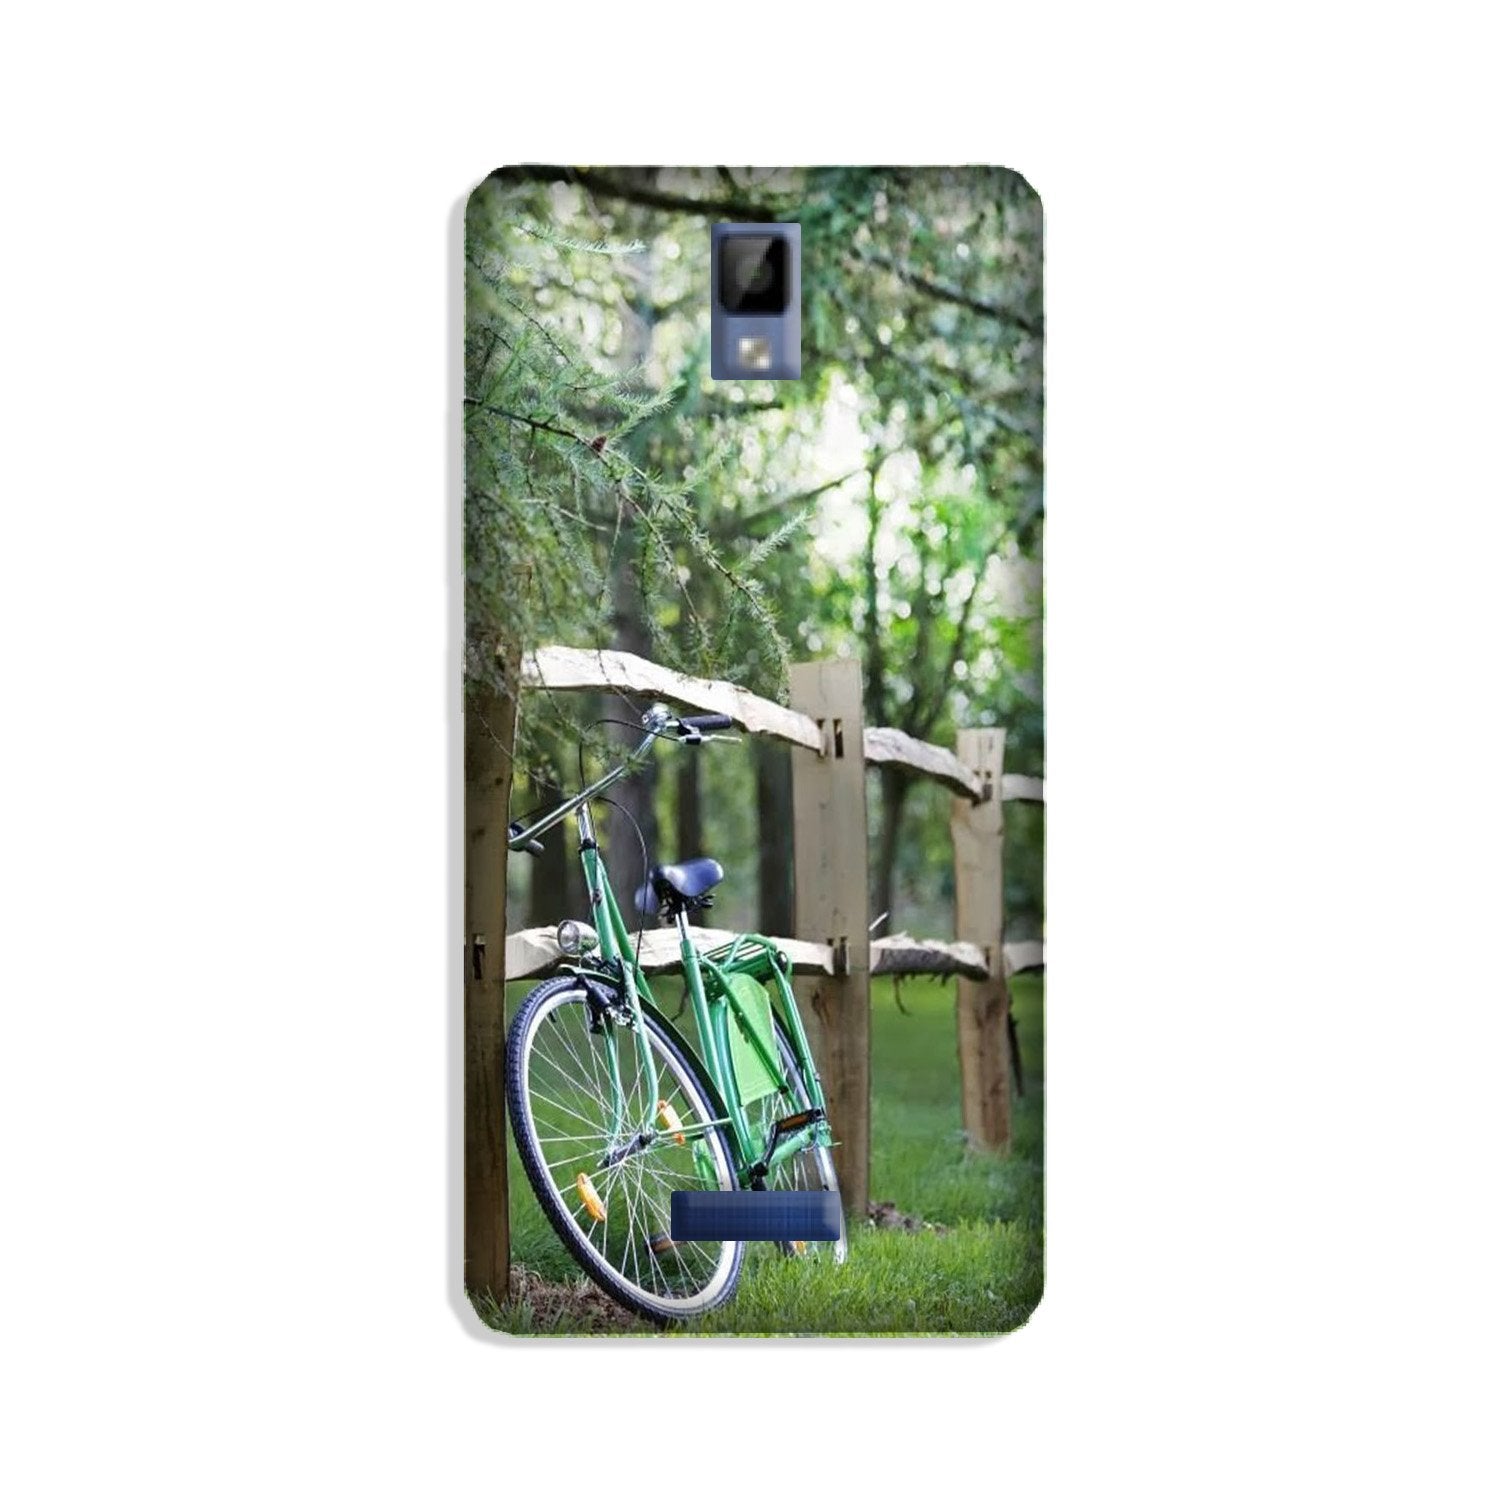 Bicycle Case for Gionee P7 (Design No. 208)